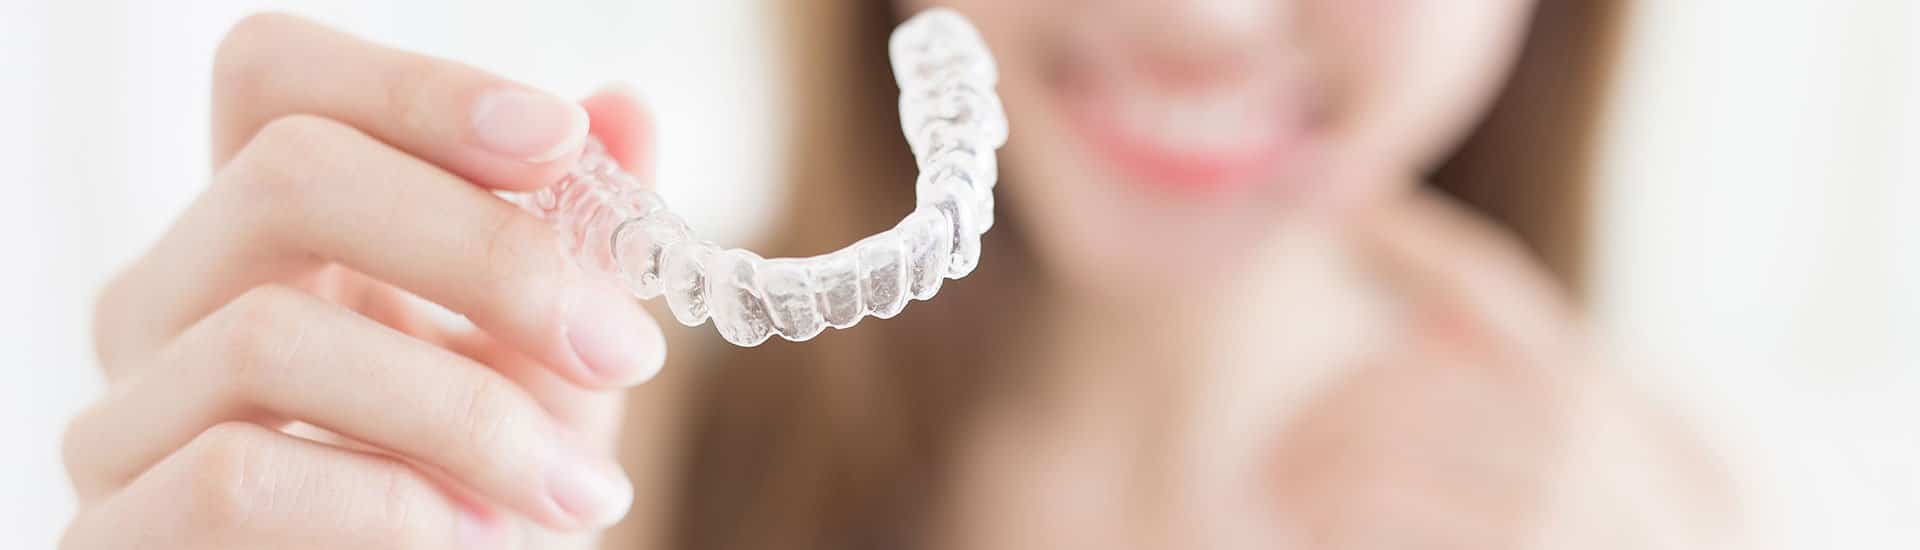 Invisalign and Spark Clear Aligner System Treatment